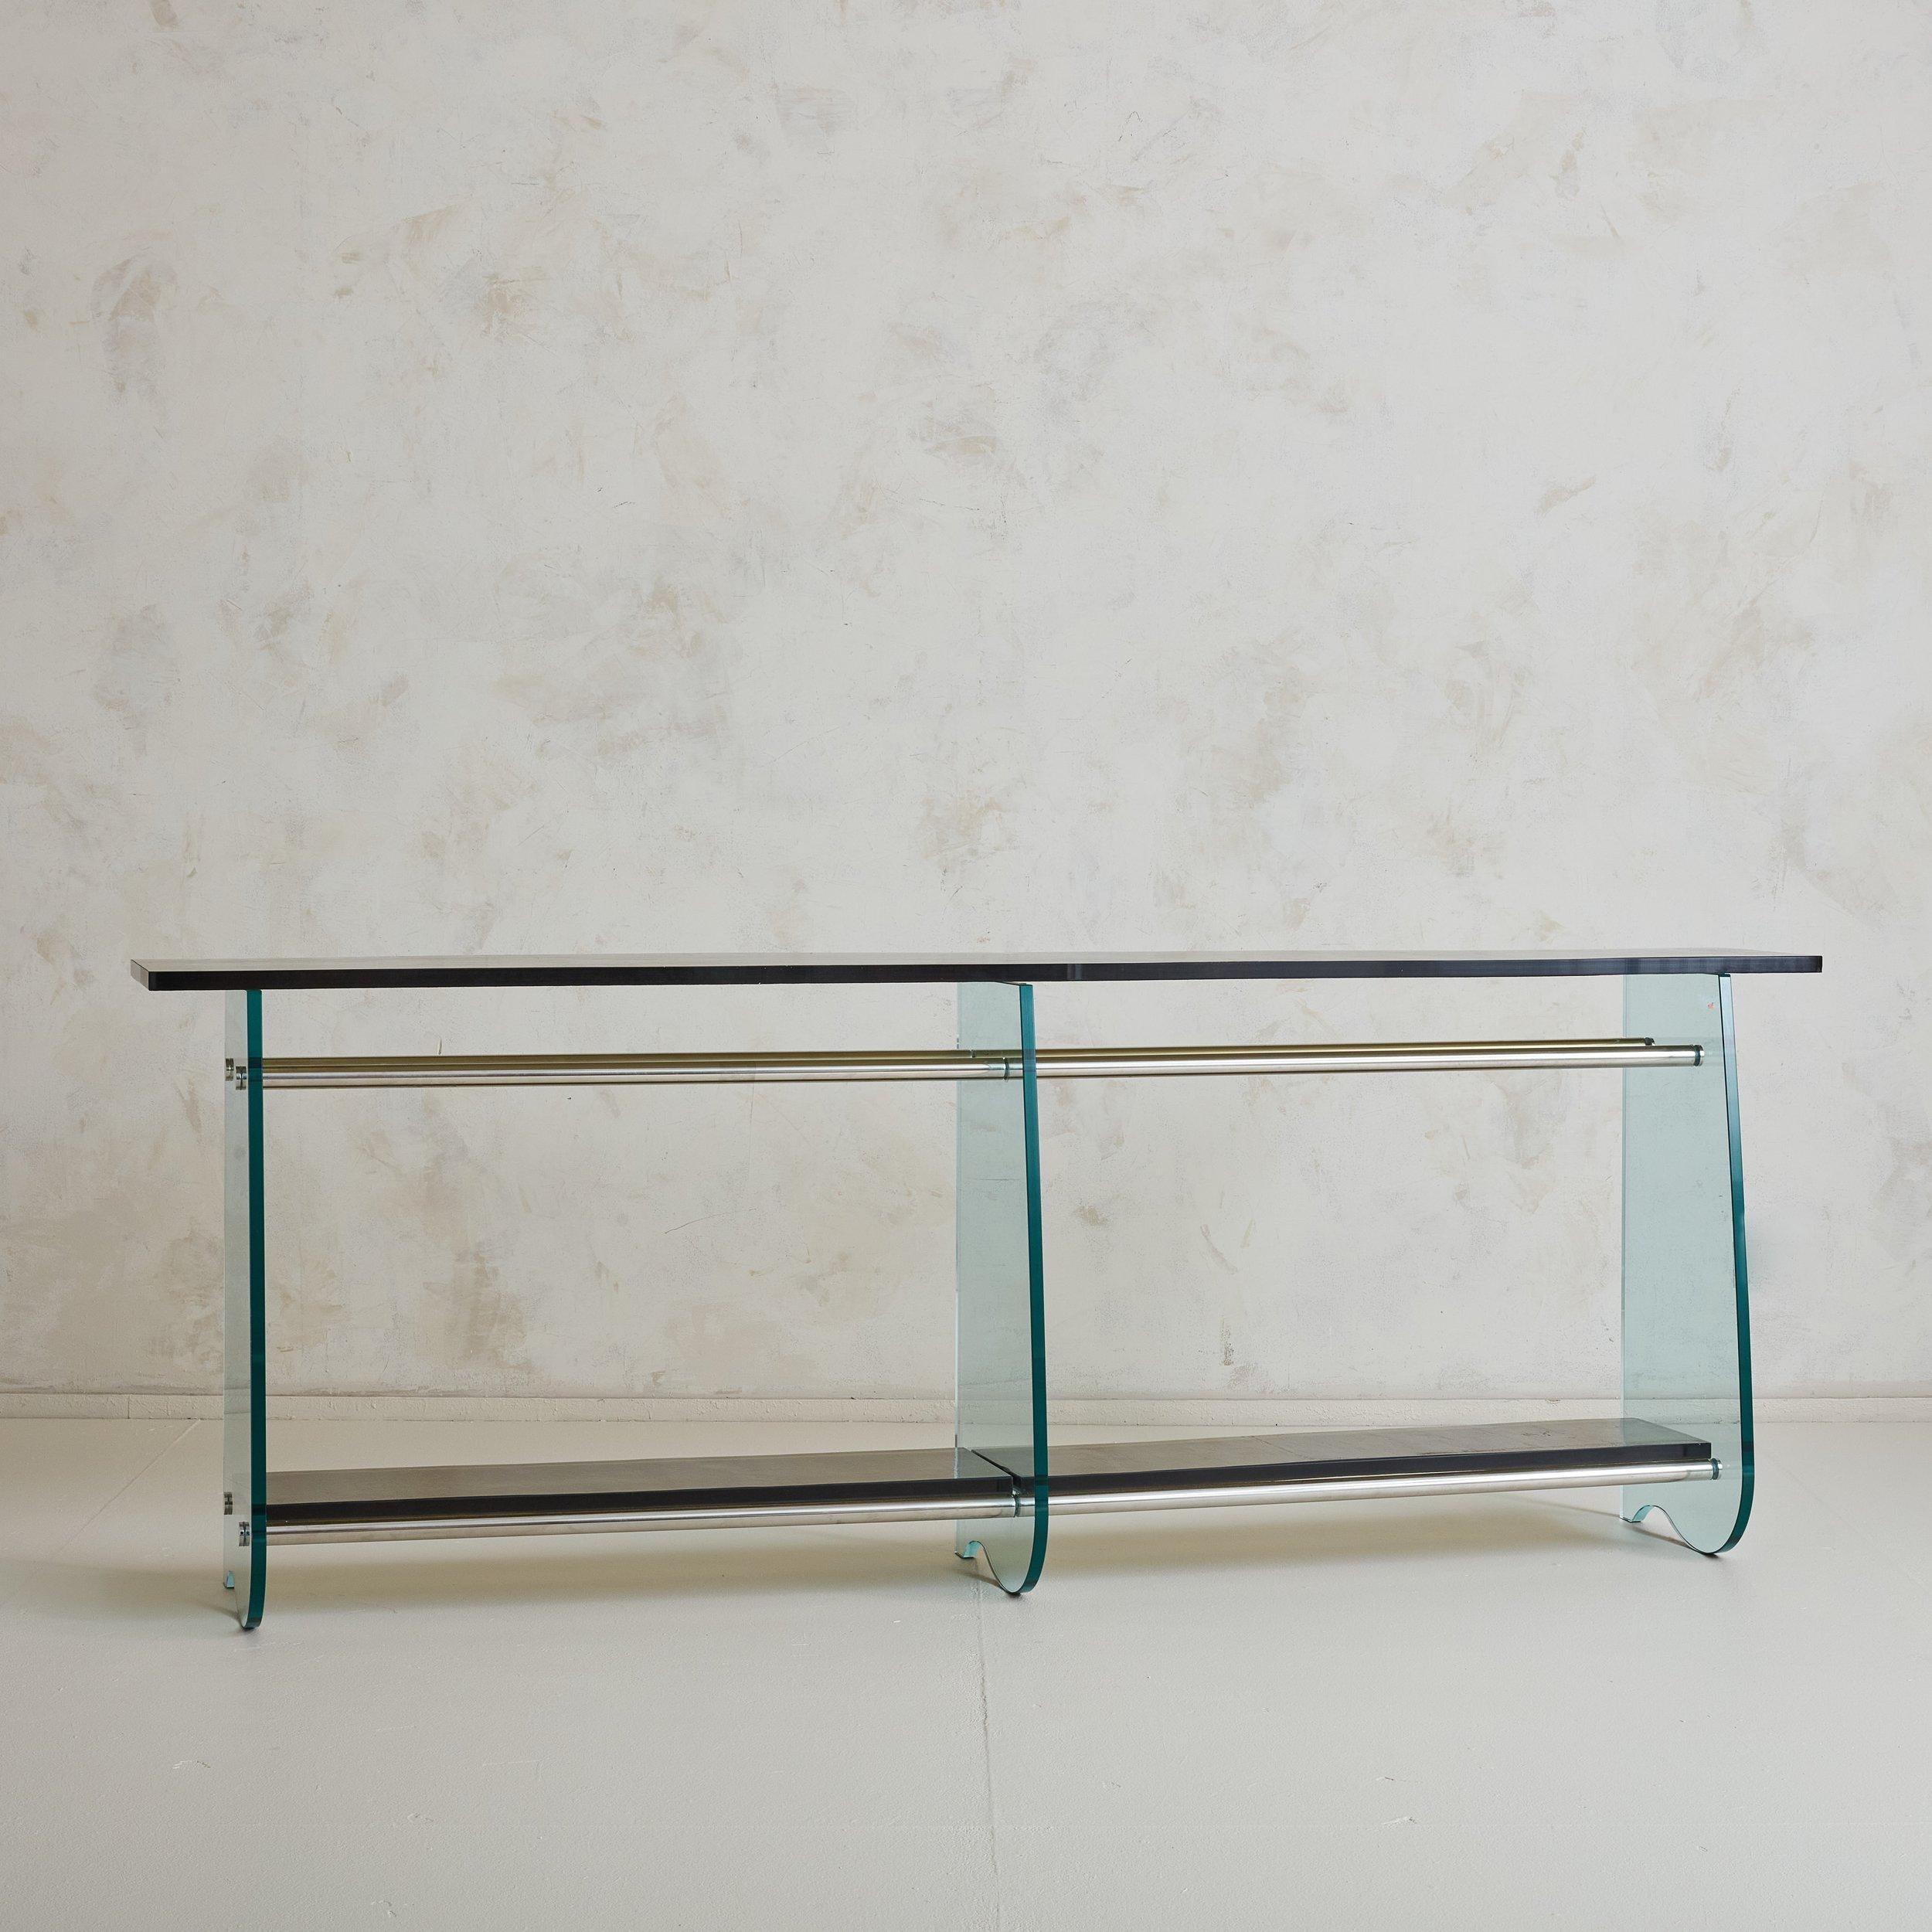 Sourced in Paris, the stunning glass console table was custom designed for an architects office in 1979. Saint Gobain has been manufacturing glass in a small village in northern France since 1693. The mirrors in the famous Hall of Mirrors in the